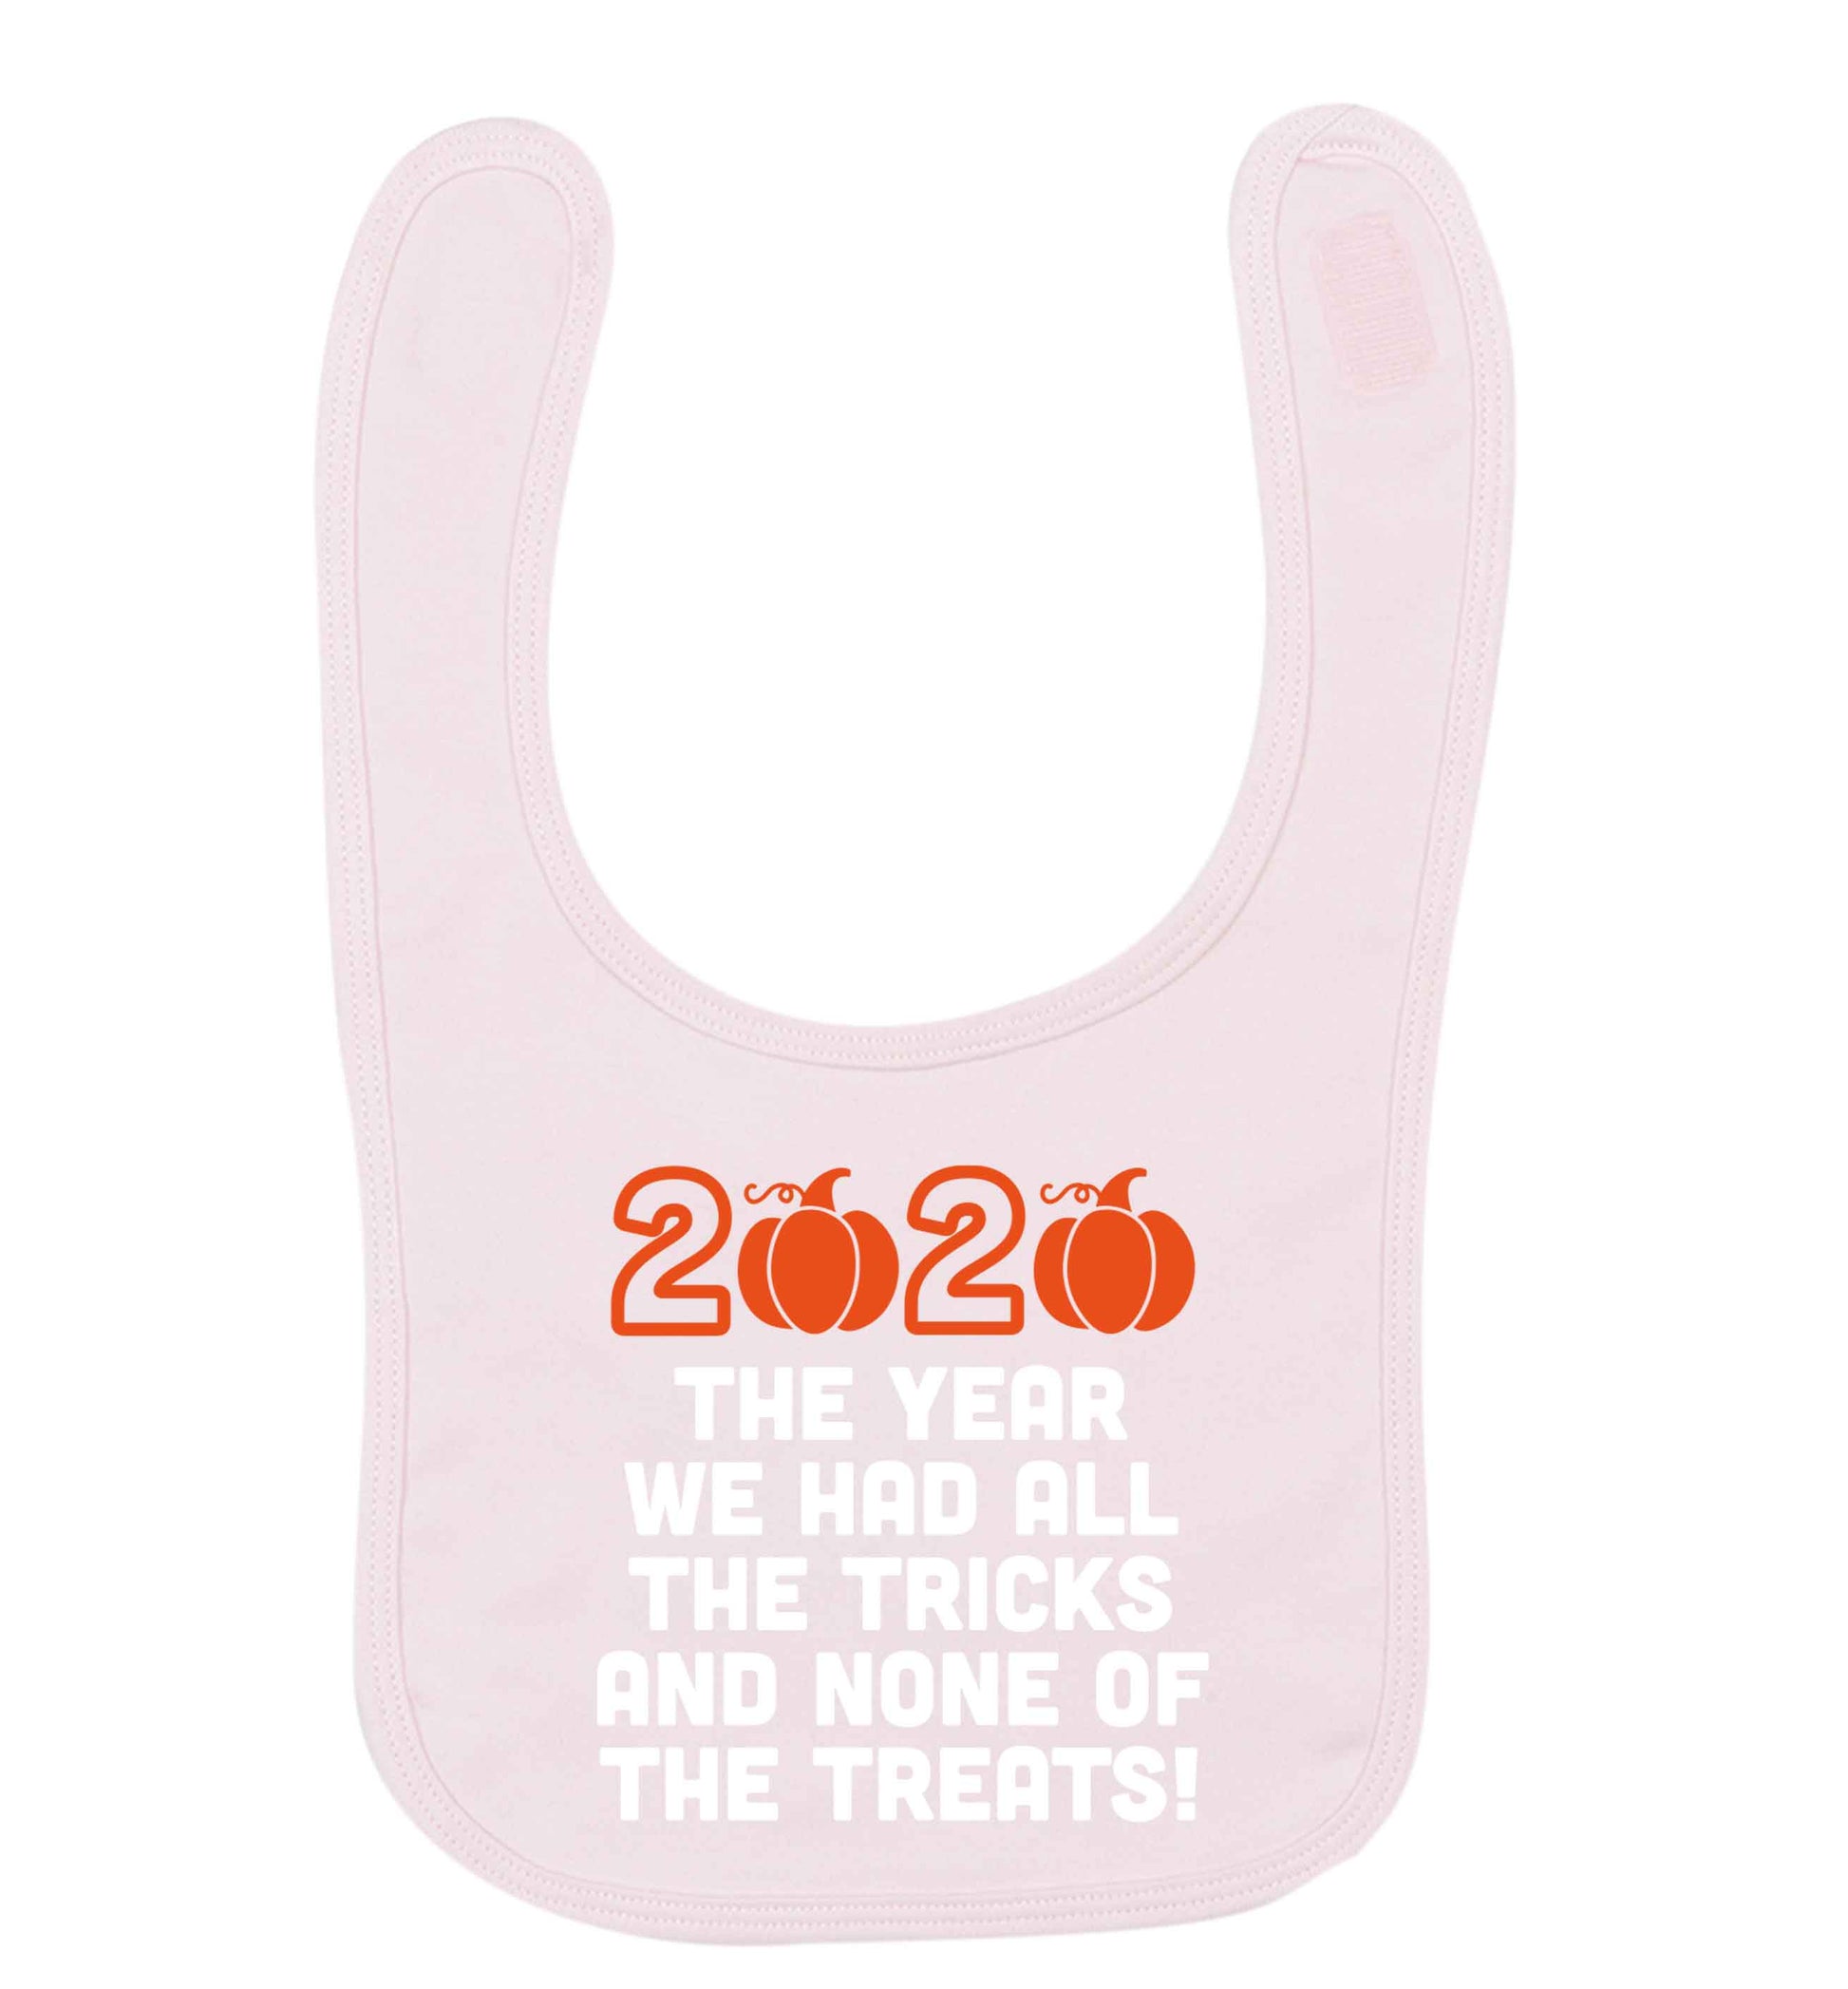 2020 The year we had all of the tricks and none of the treats pale pink baby bib